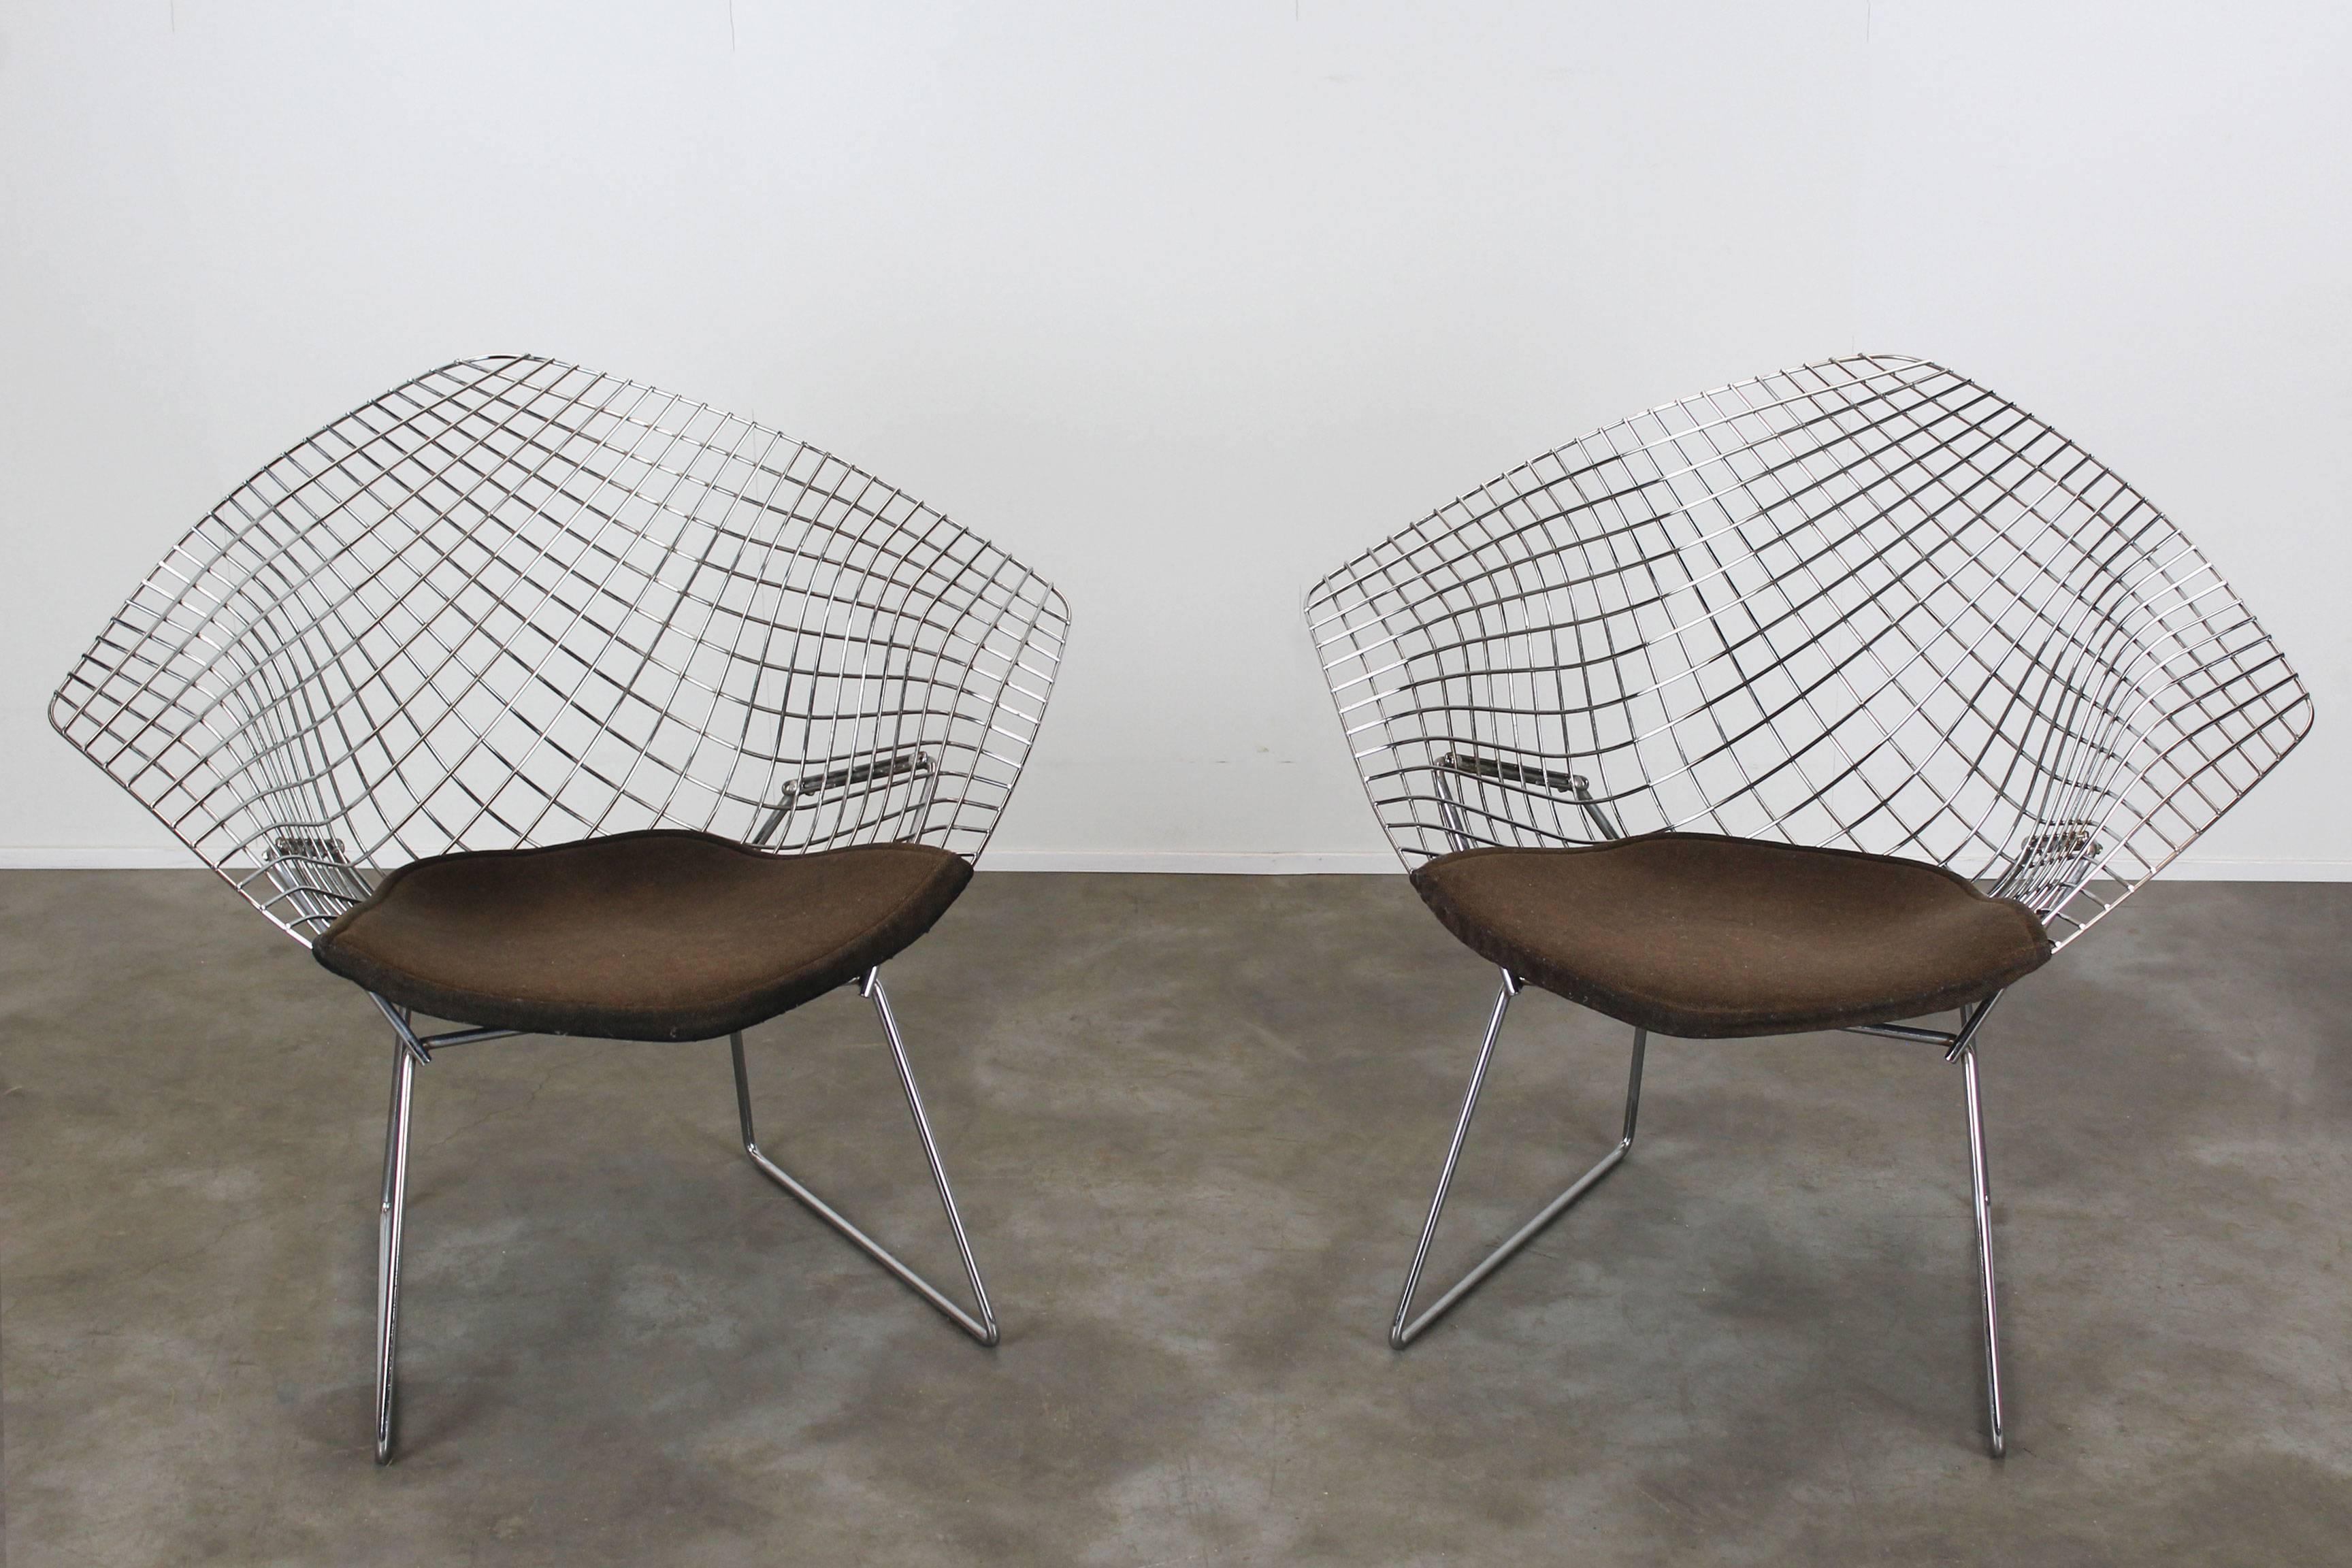 Set of two chrome diamond chairs by Harry Bertoia for Knoll with grey/brown cushions. 
Slight sings of use on the cushions, chrome in great shape.